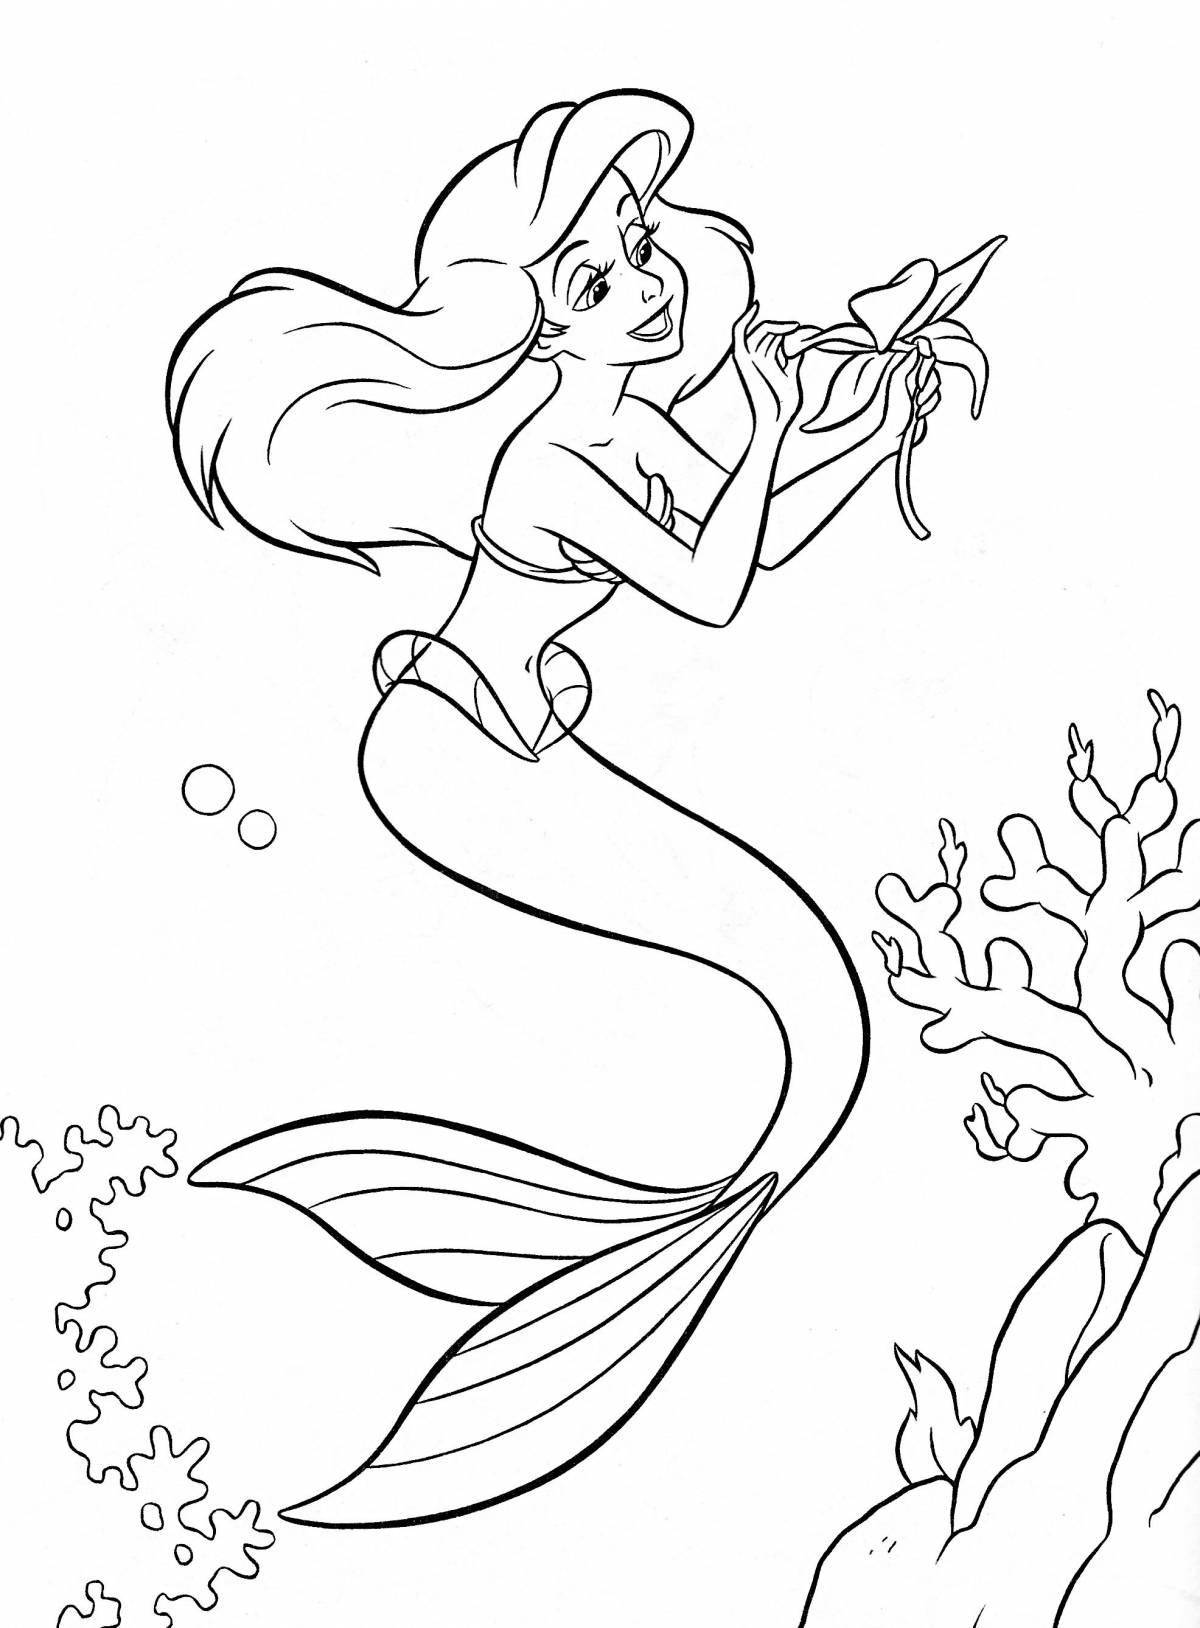 Radiant coloring page disney girls